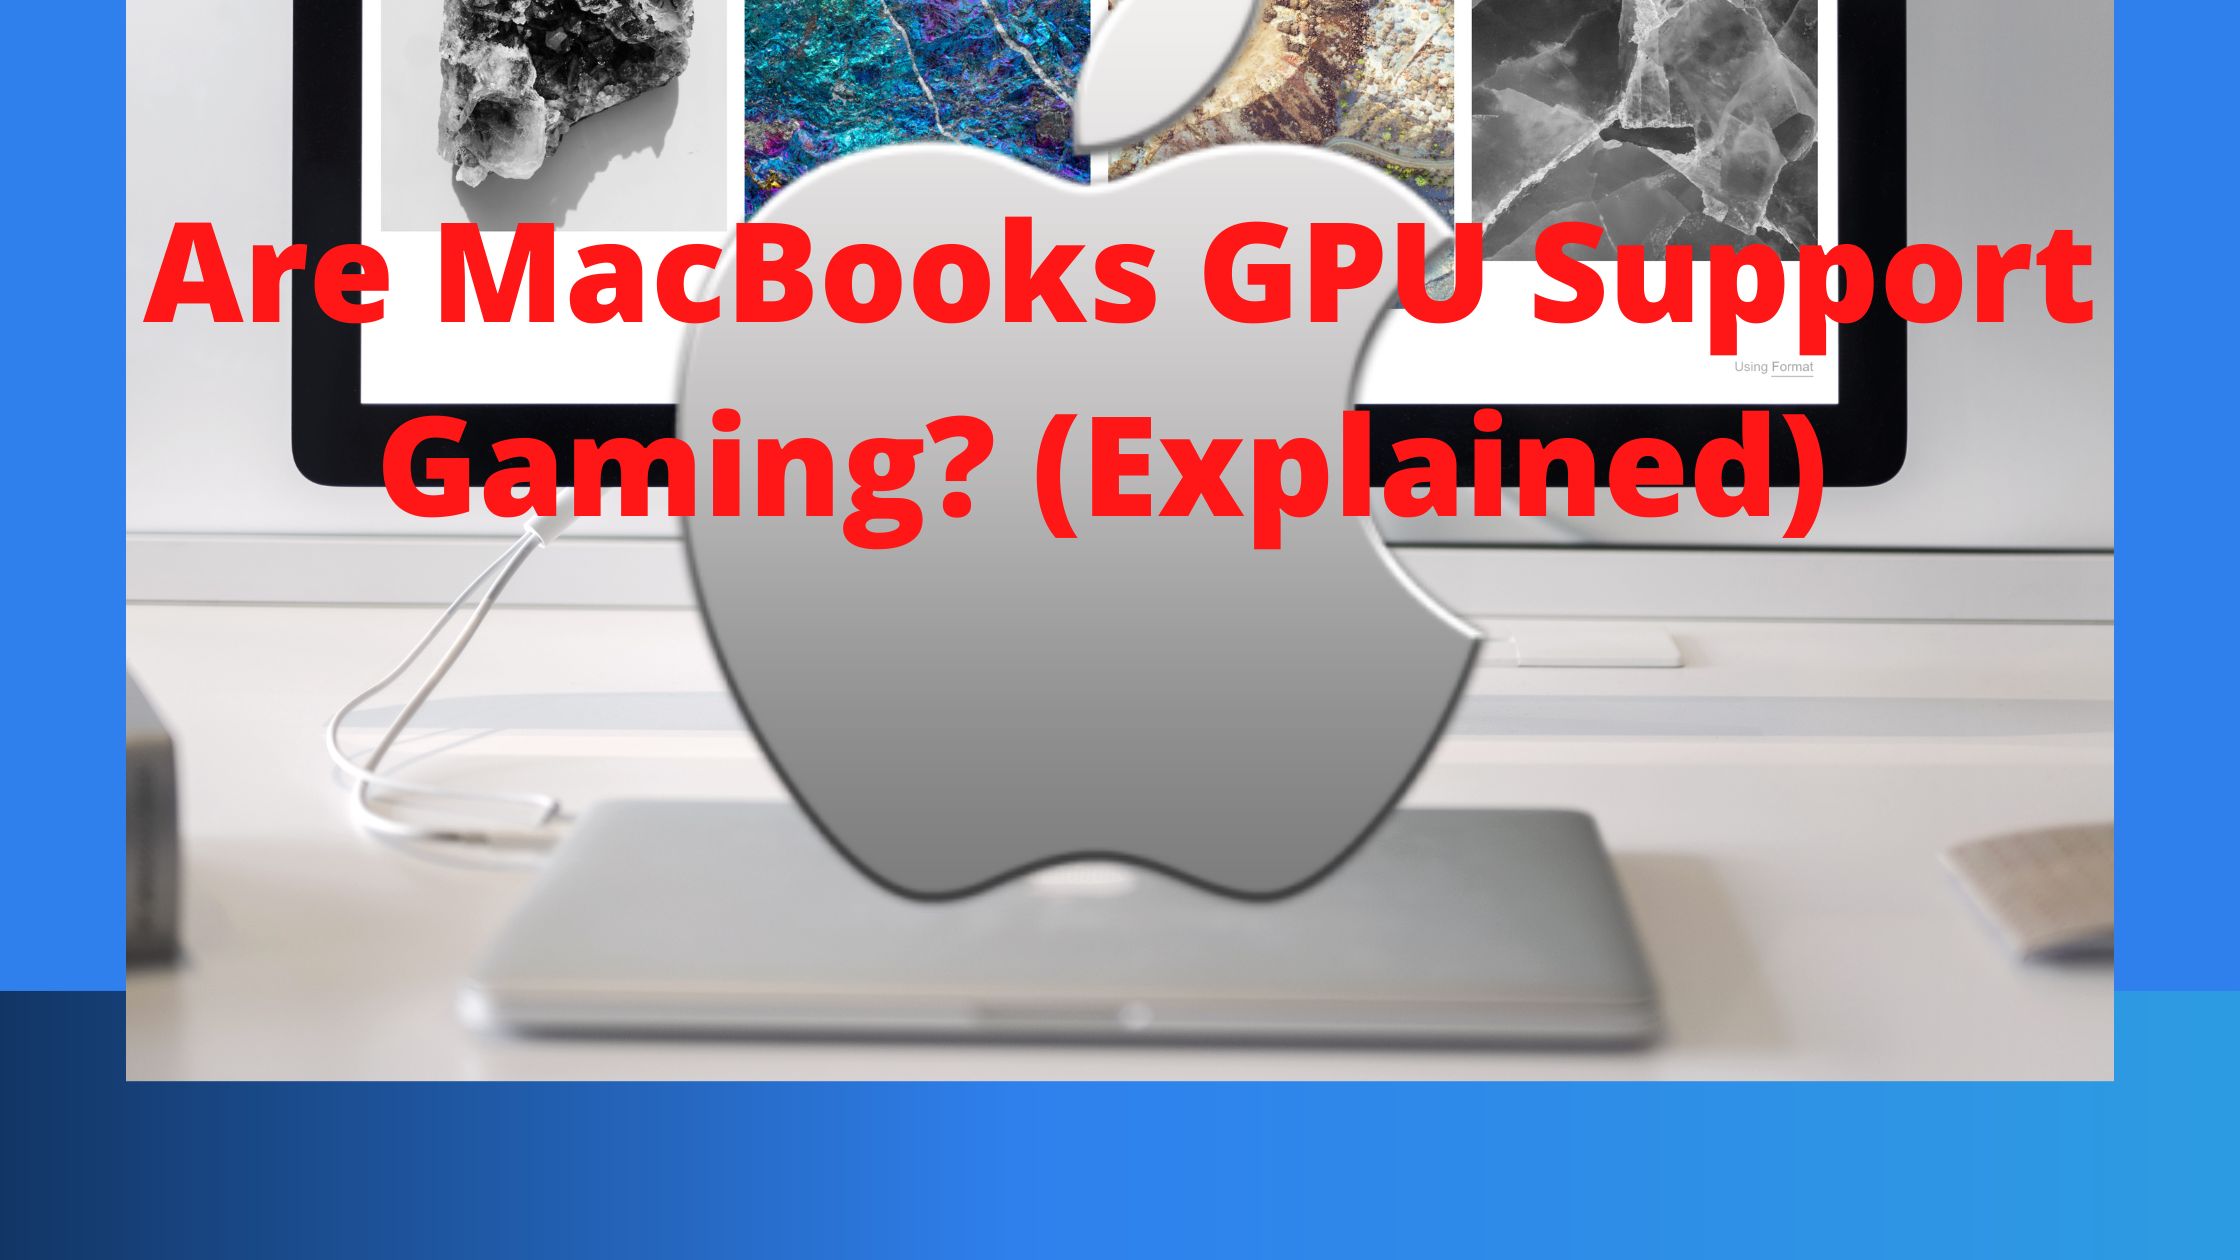 Are MacBooks GPU Support Gaming? (Explained)